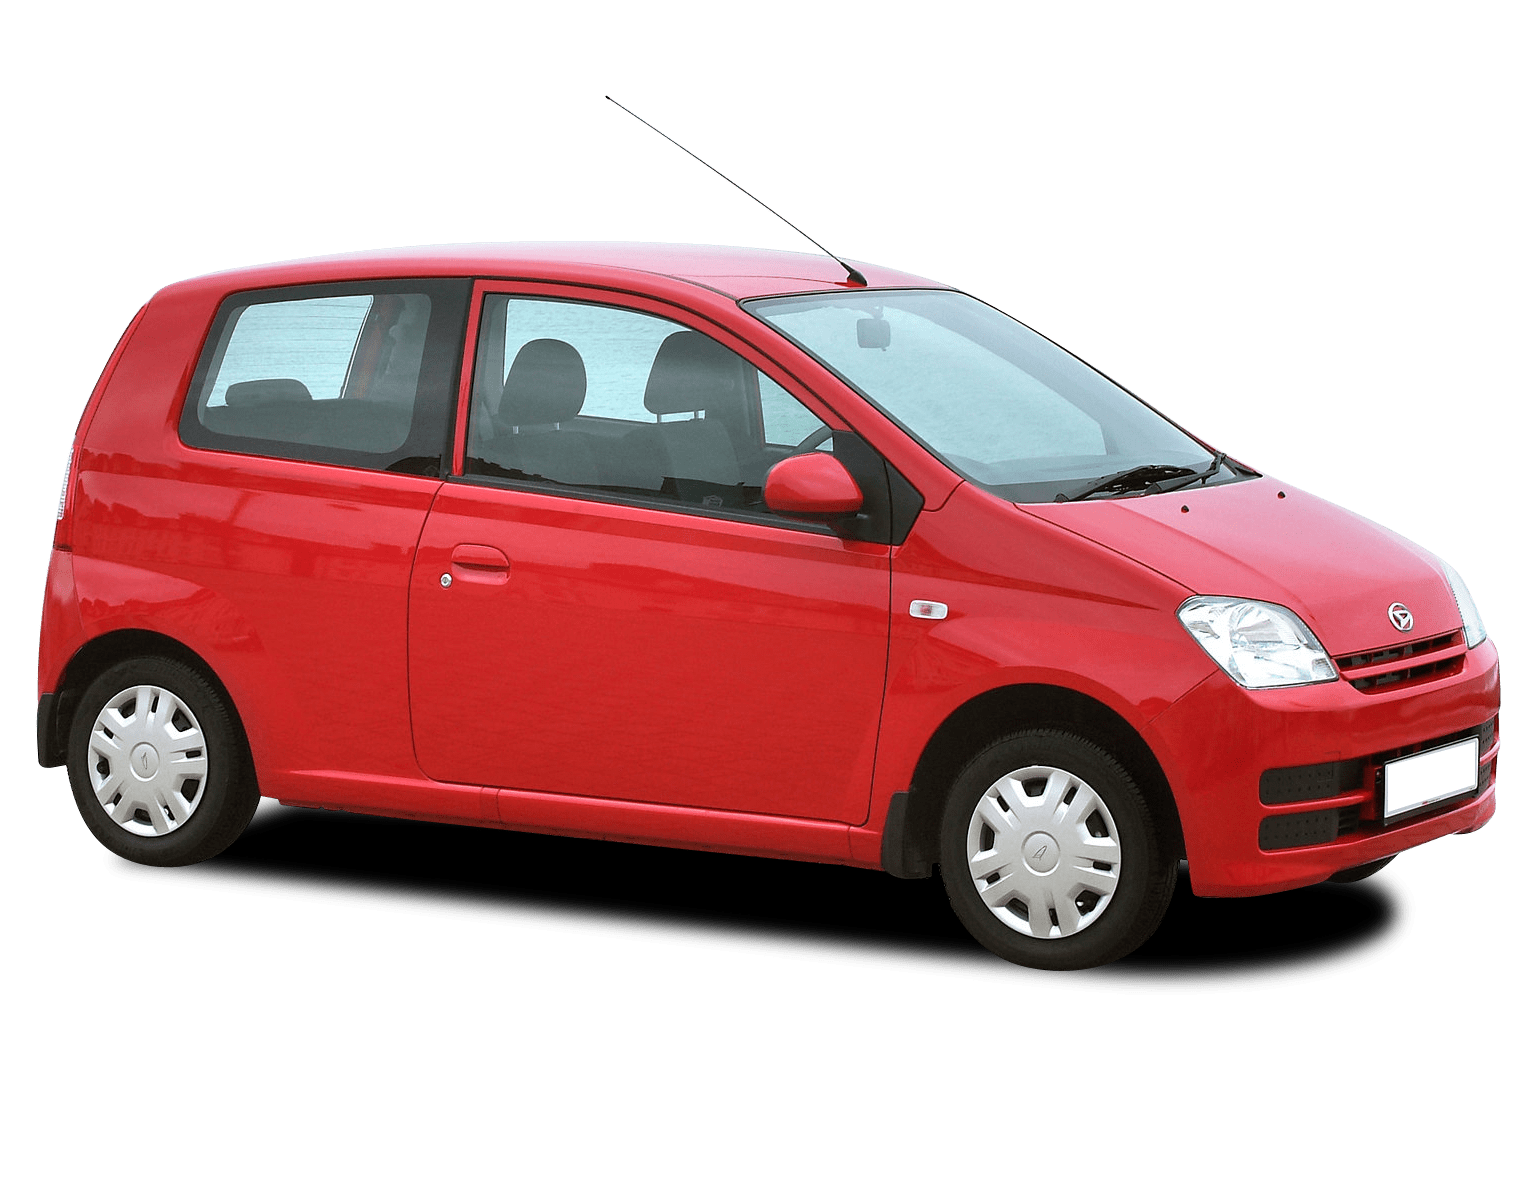 Daihatsu Charade Review, For Sale, Specs, Models & News in